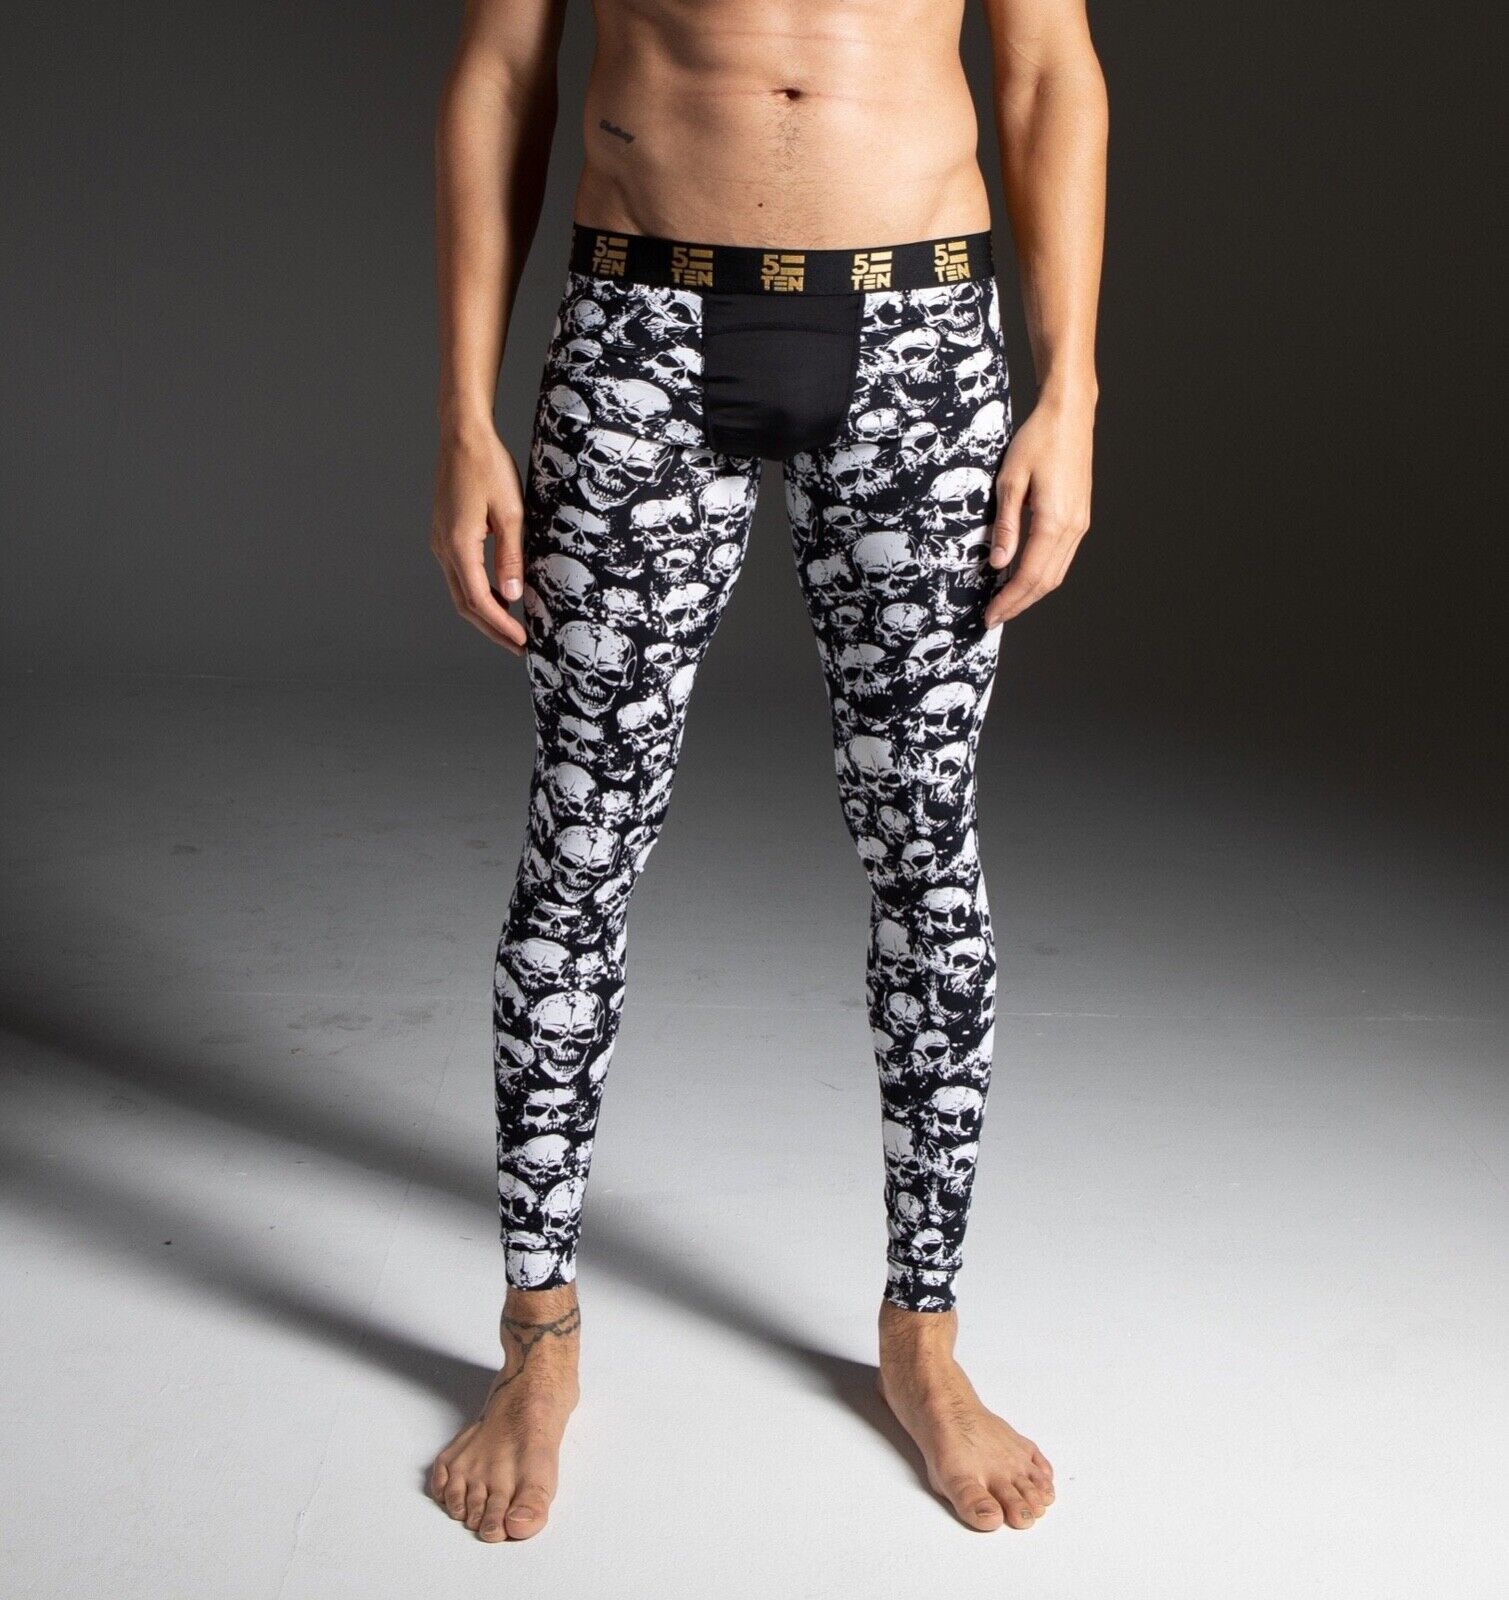 Primary image for 5equals10 "5=10 " The "Hades" Legging  "Large"